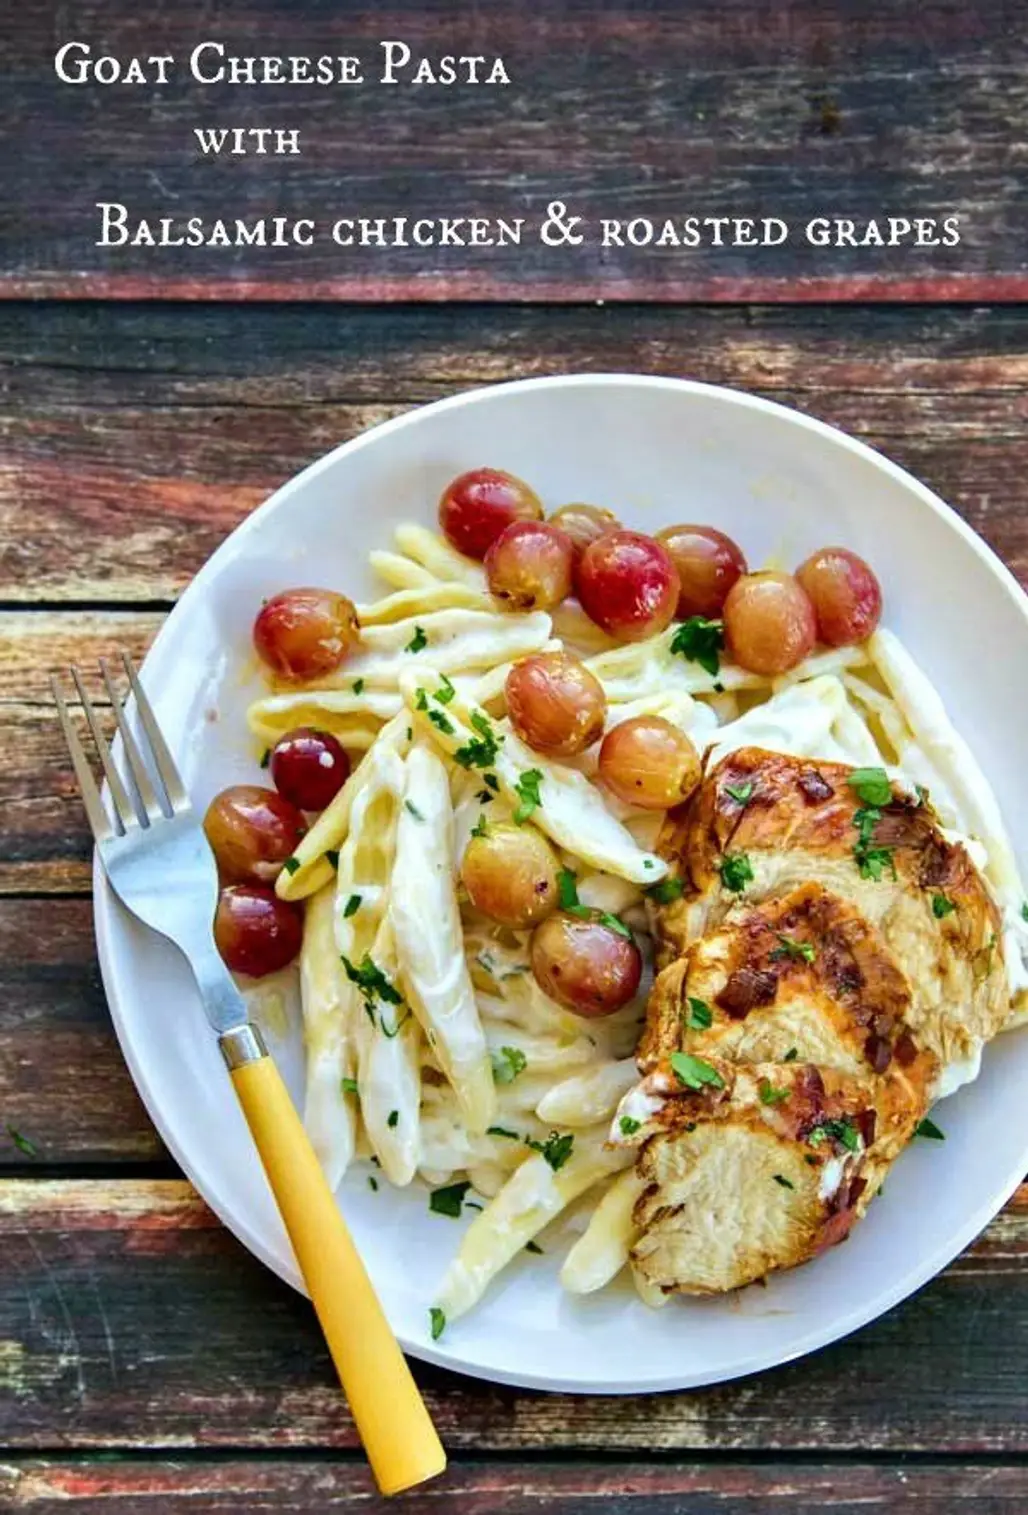 Balsamic Chicken with Goat Cheese Pasta and Roasted Grapes